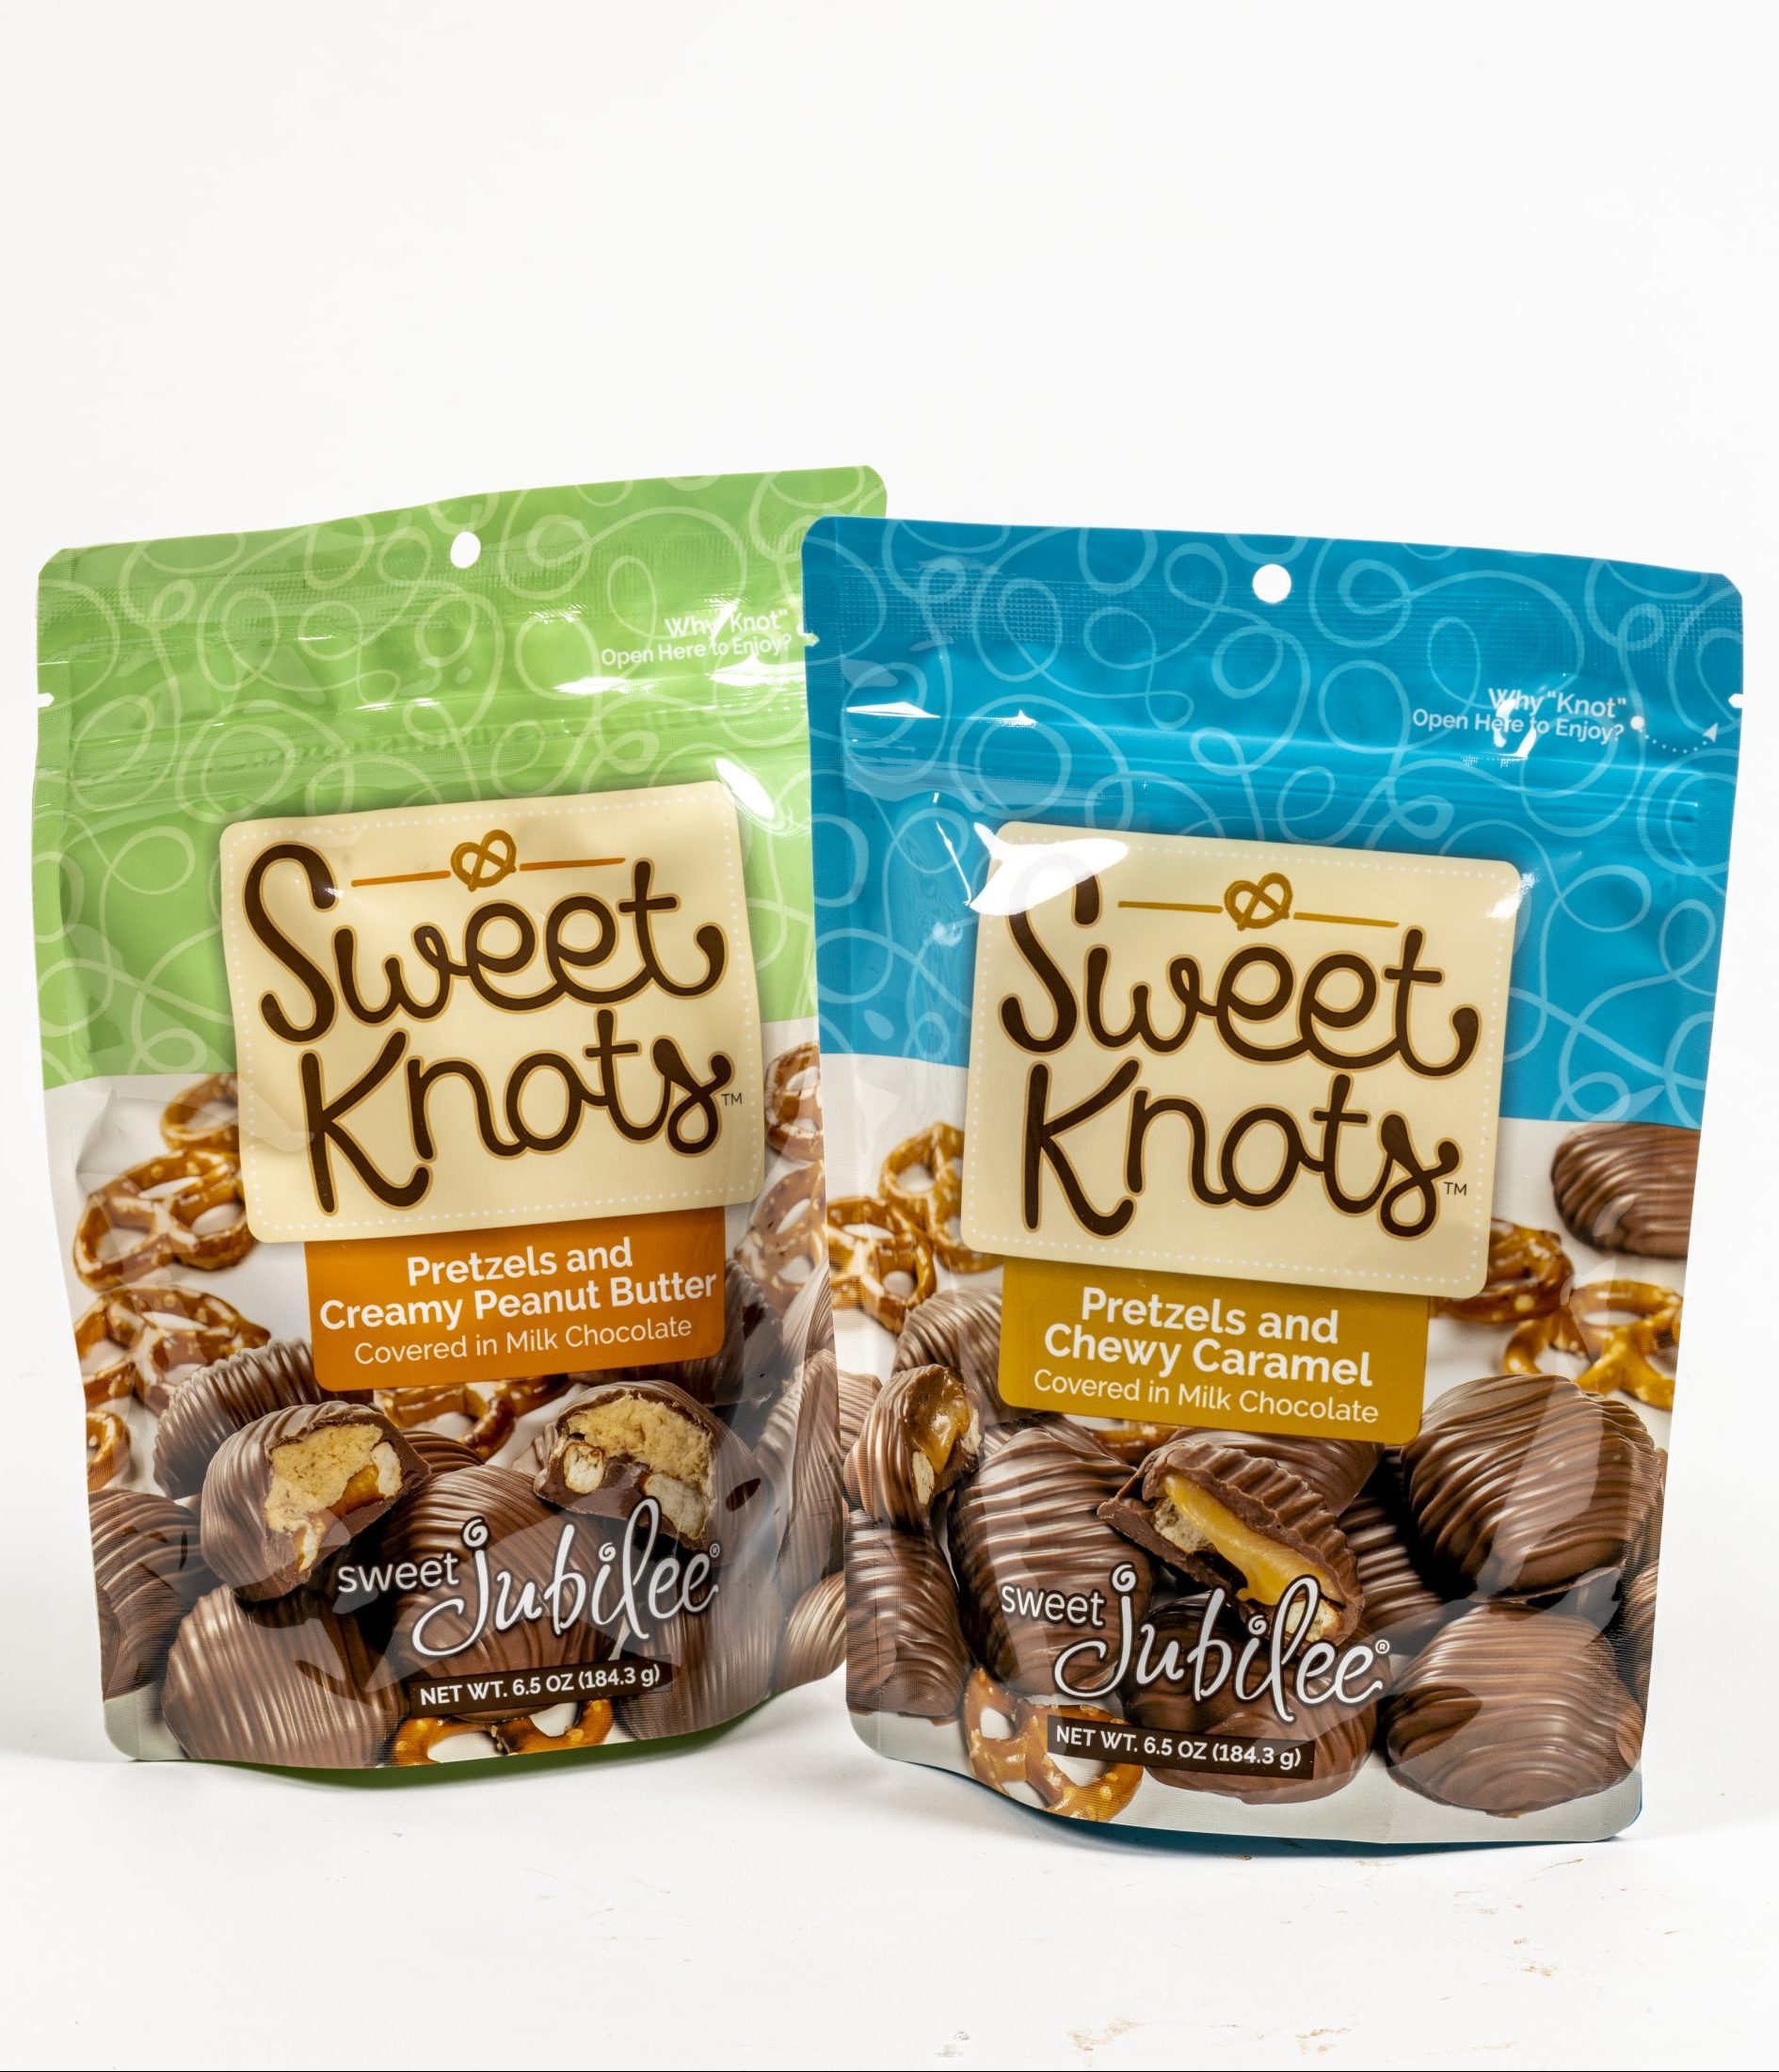 assorted sweet knots with gourmet chocolate, caramel, and peanut butter